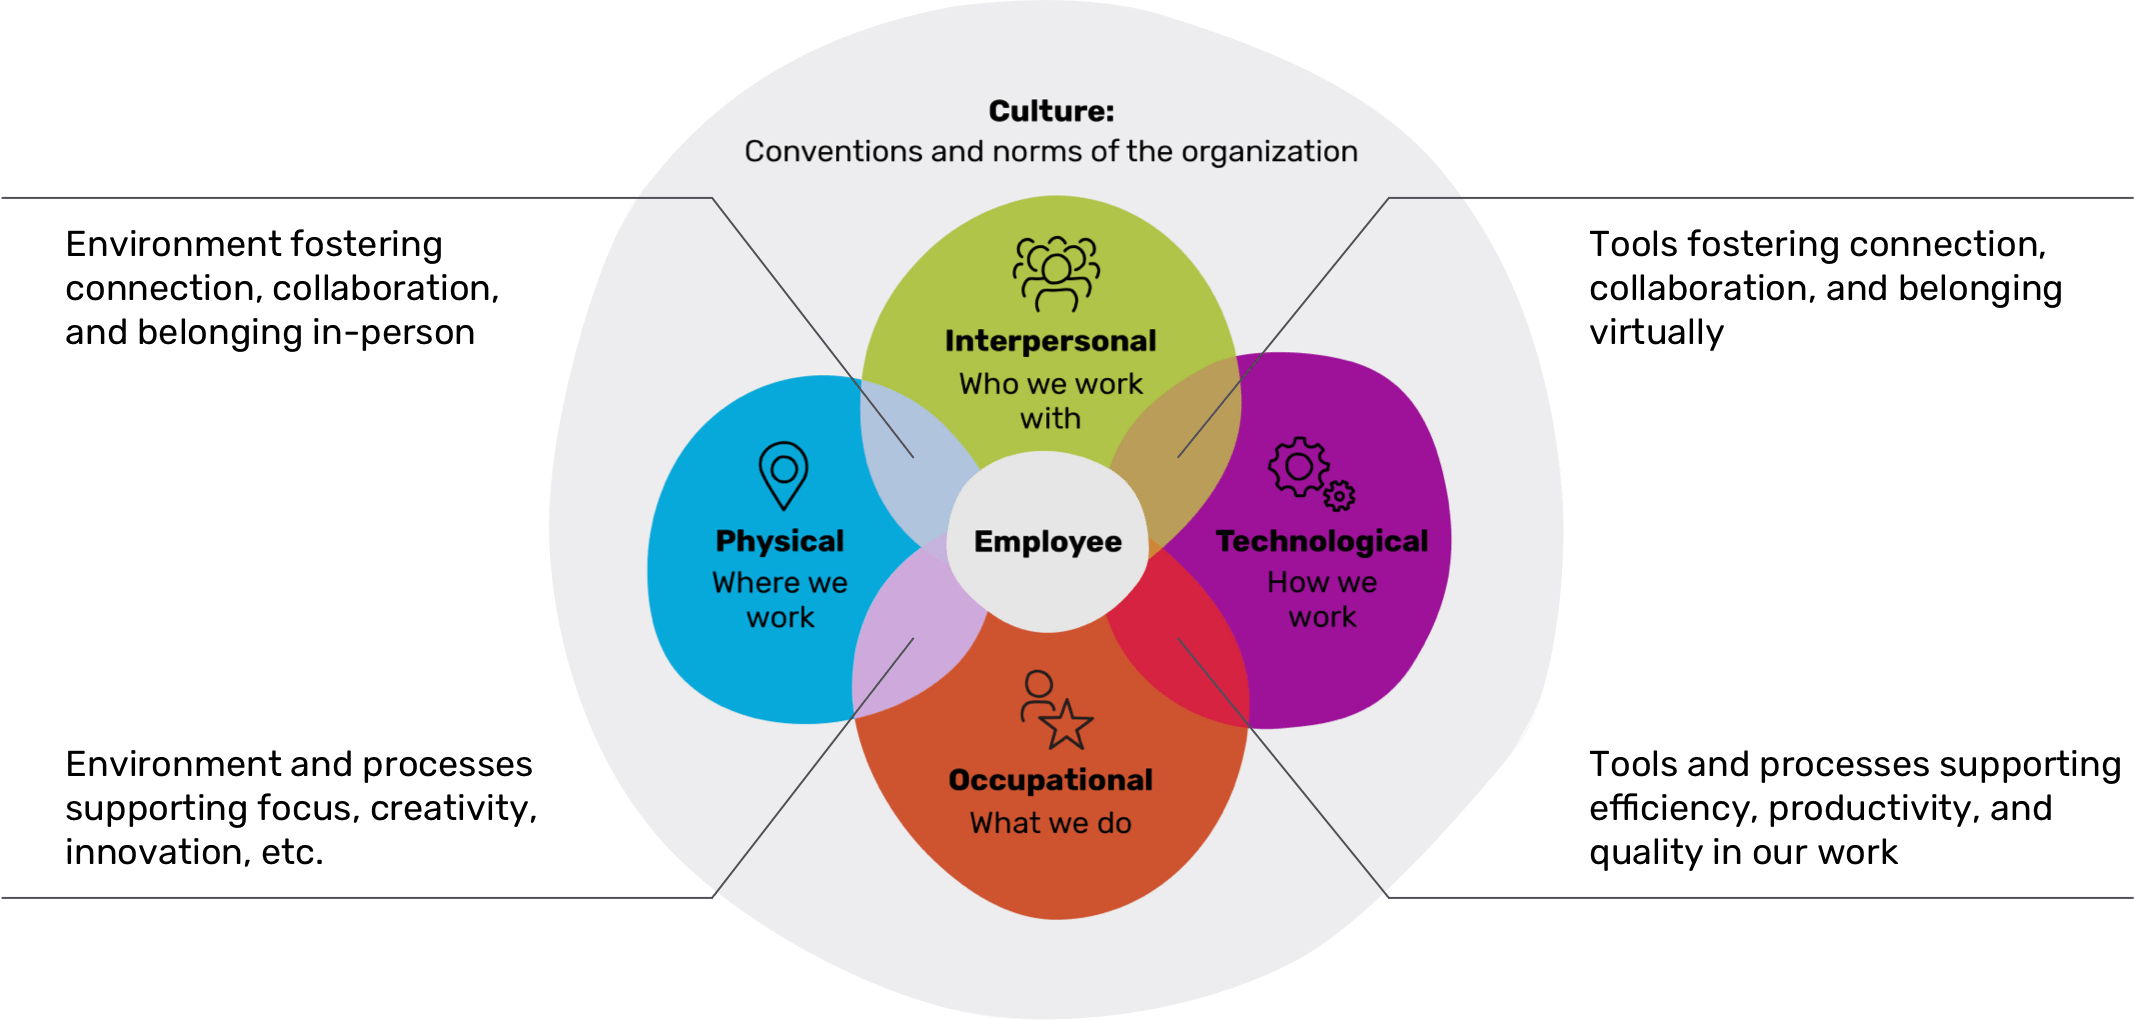 Diagram showing holistic employee experience and company culture through the interpersonal, technological, occupational, and physical 